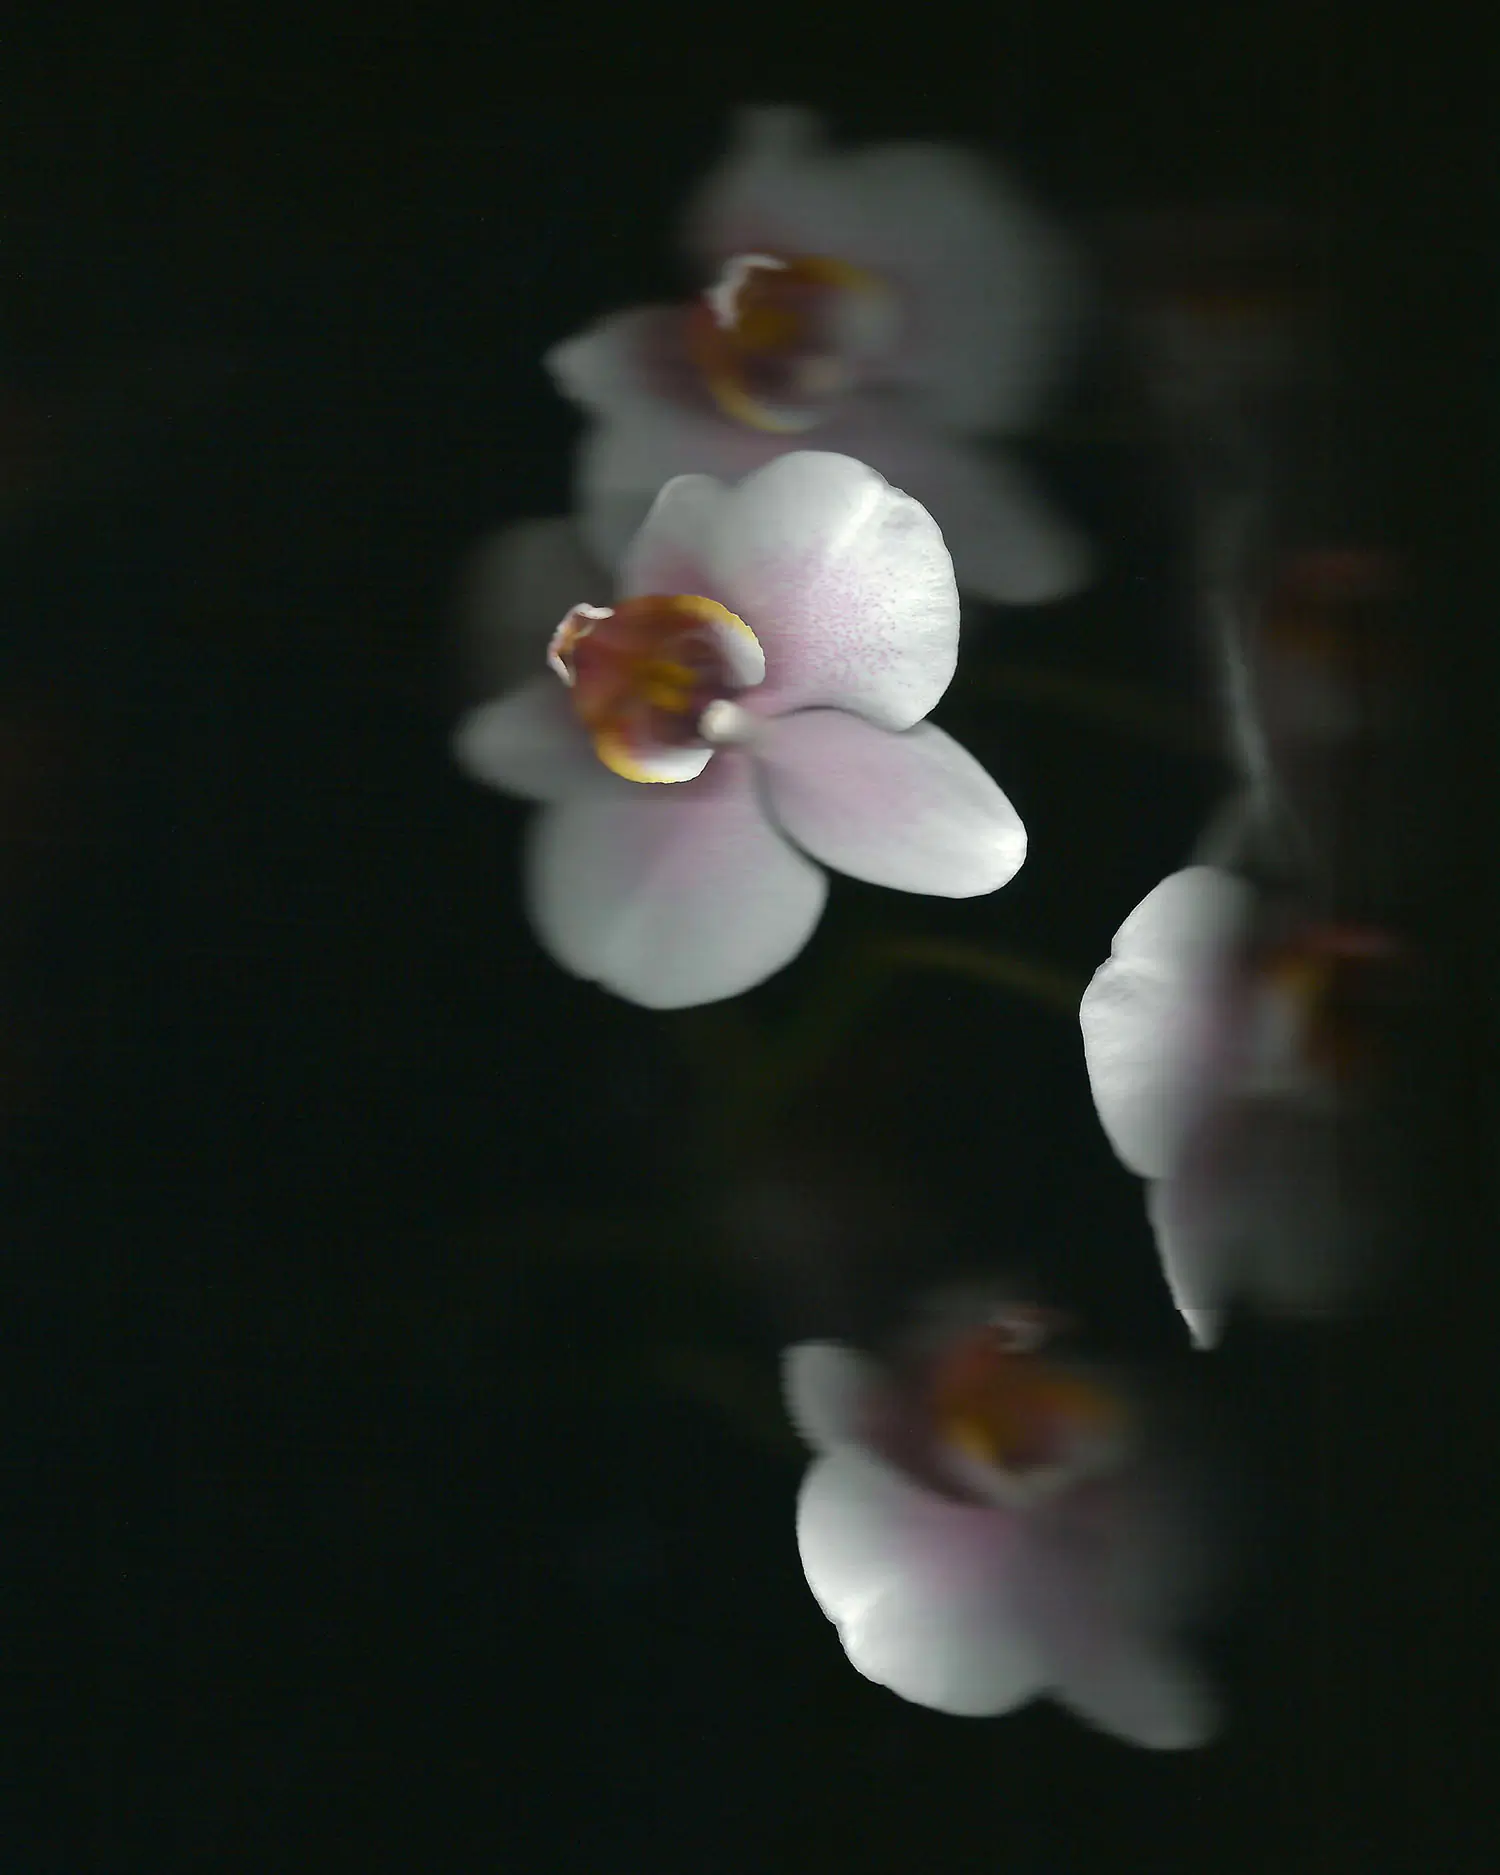 Printer scan of orchid flowers